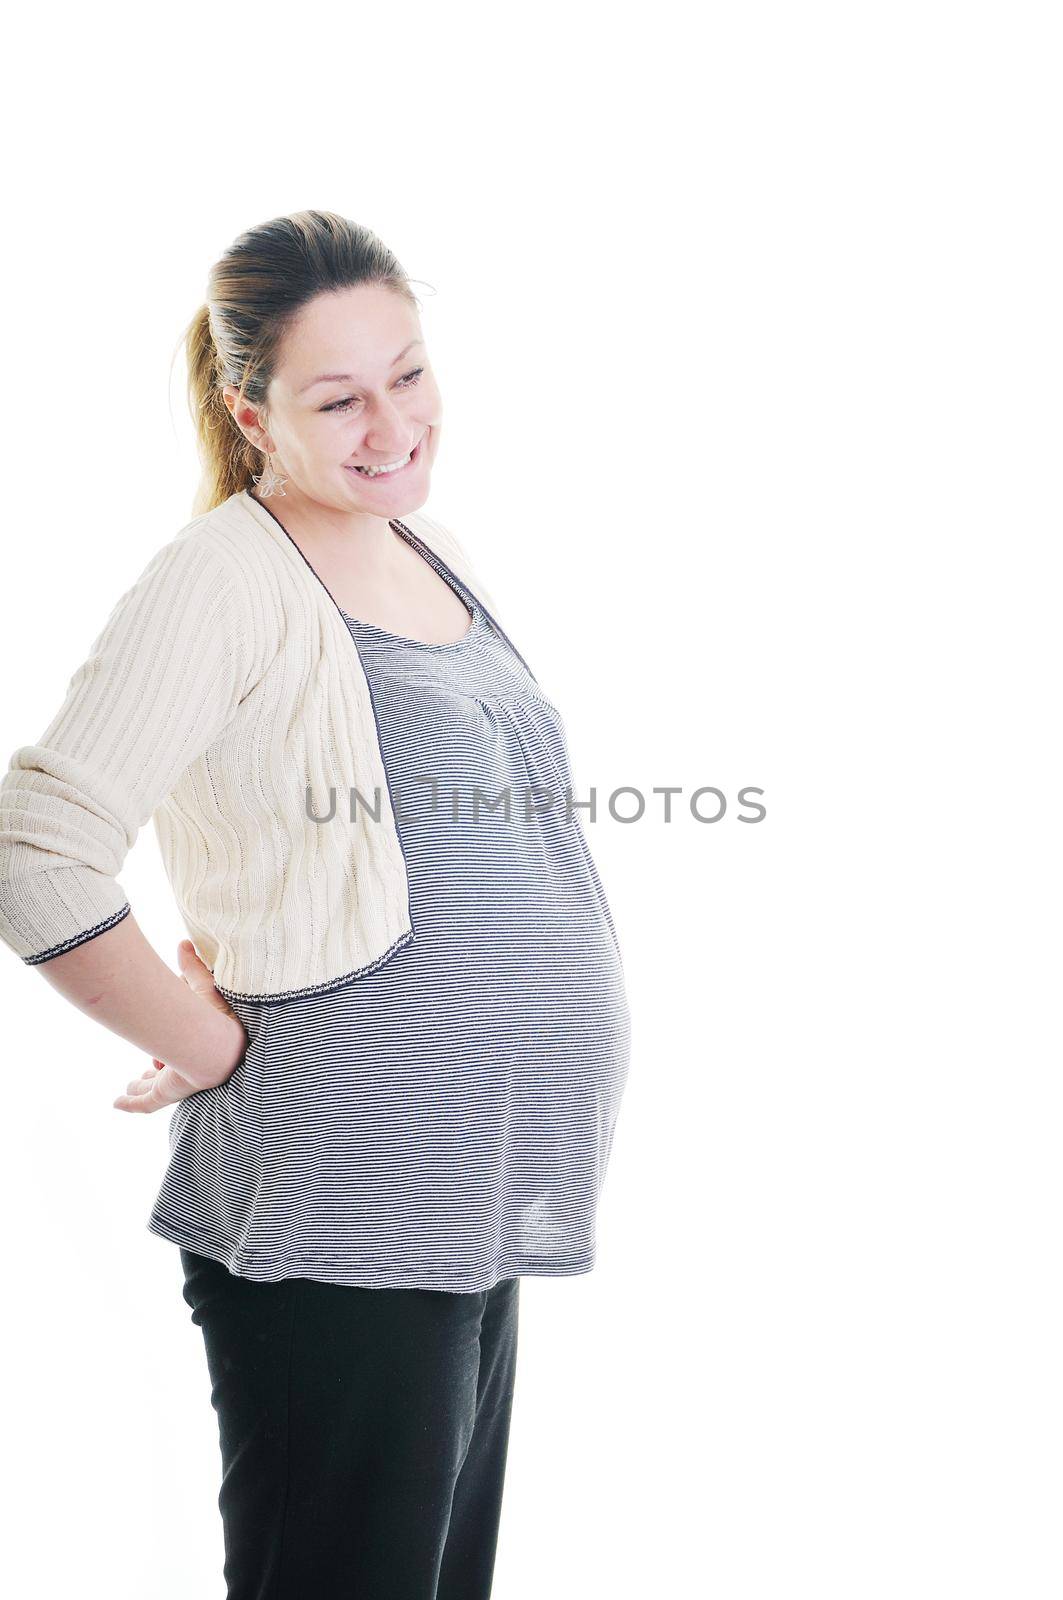 one happy pregnant woman smile isolated on white in studio